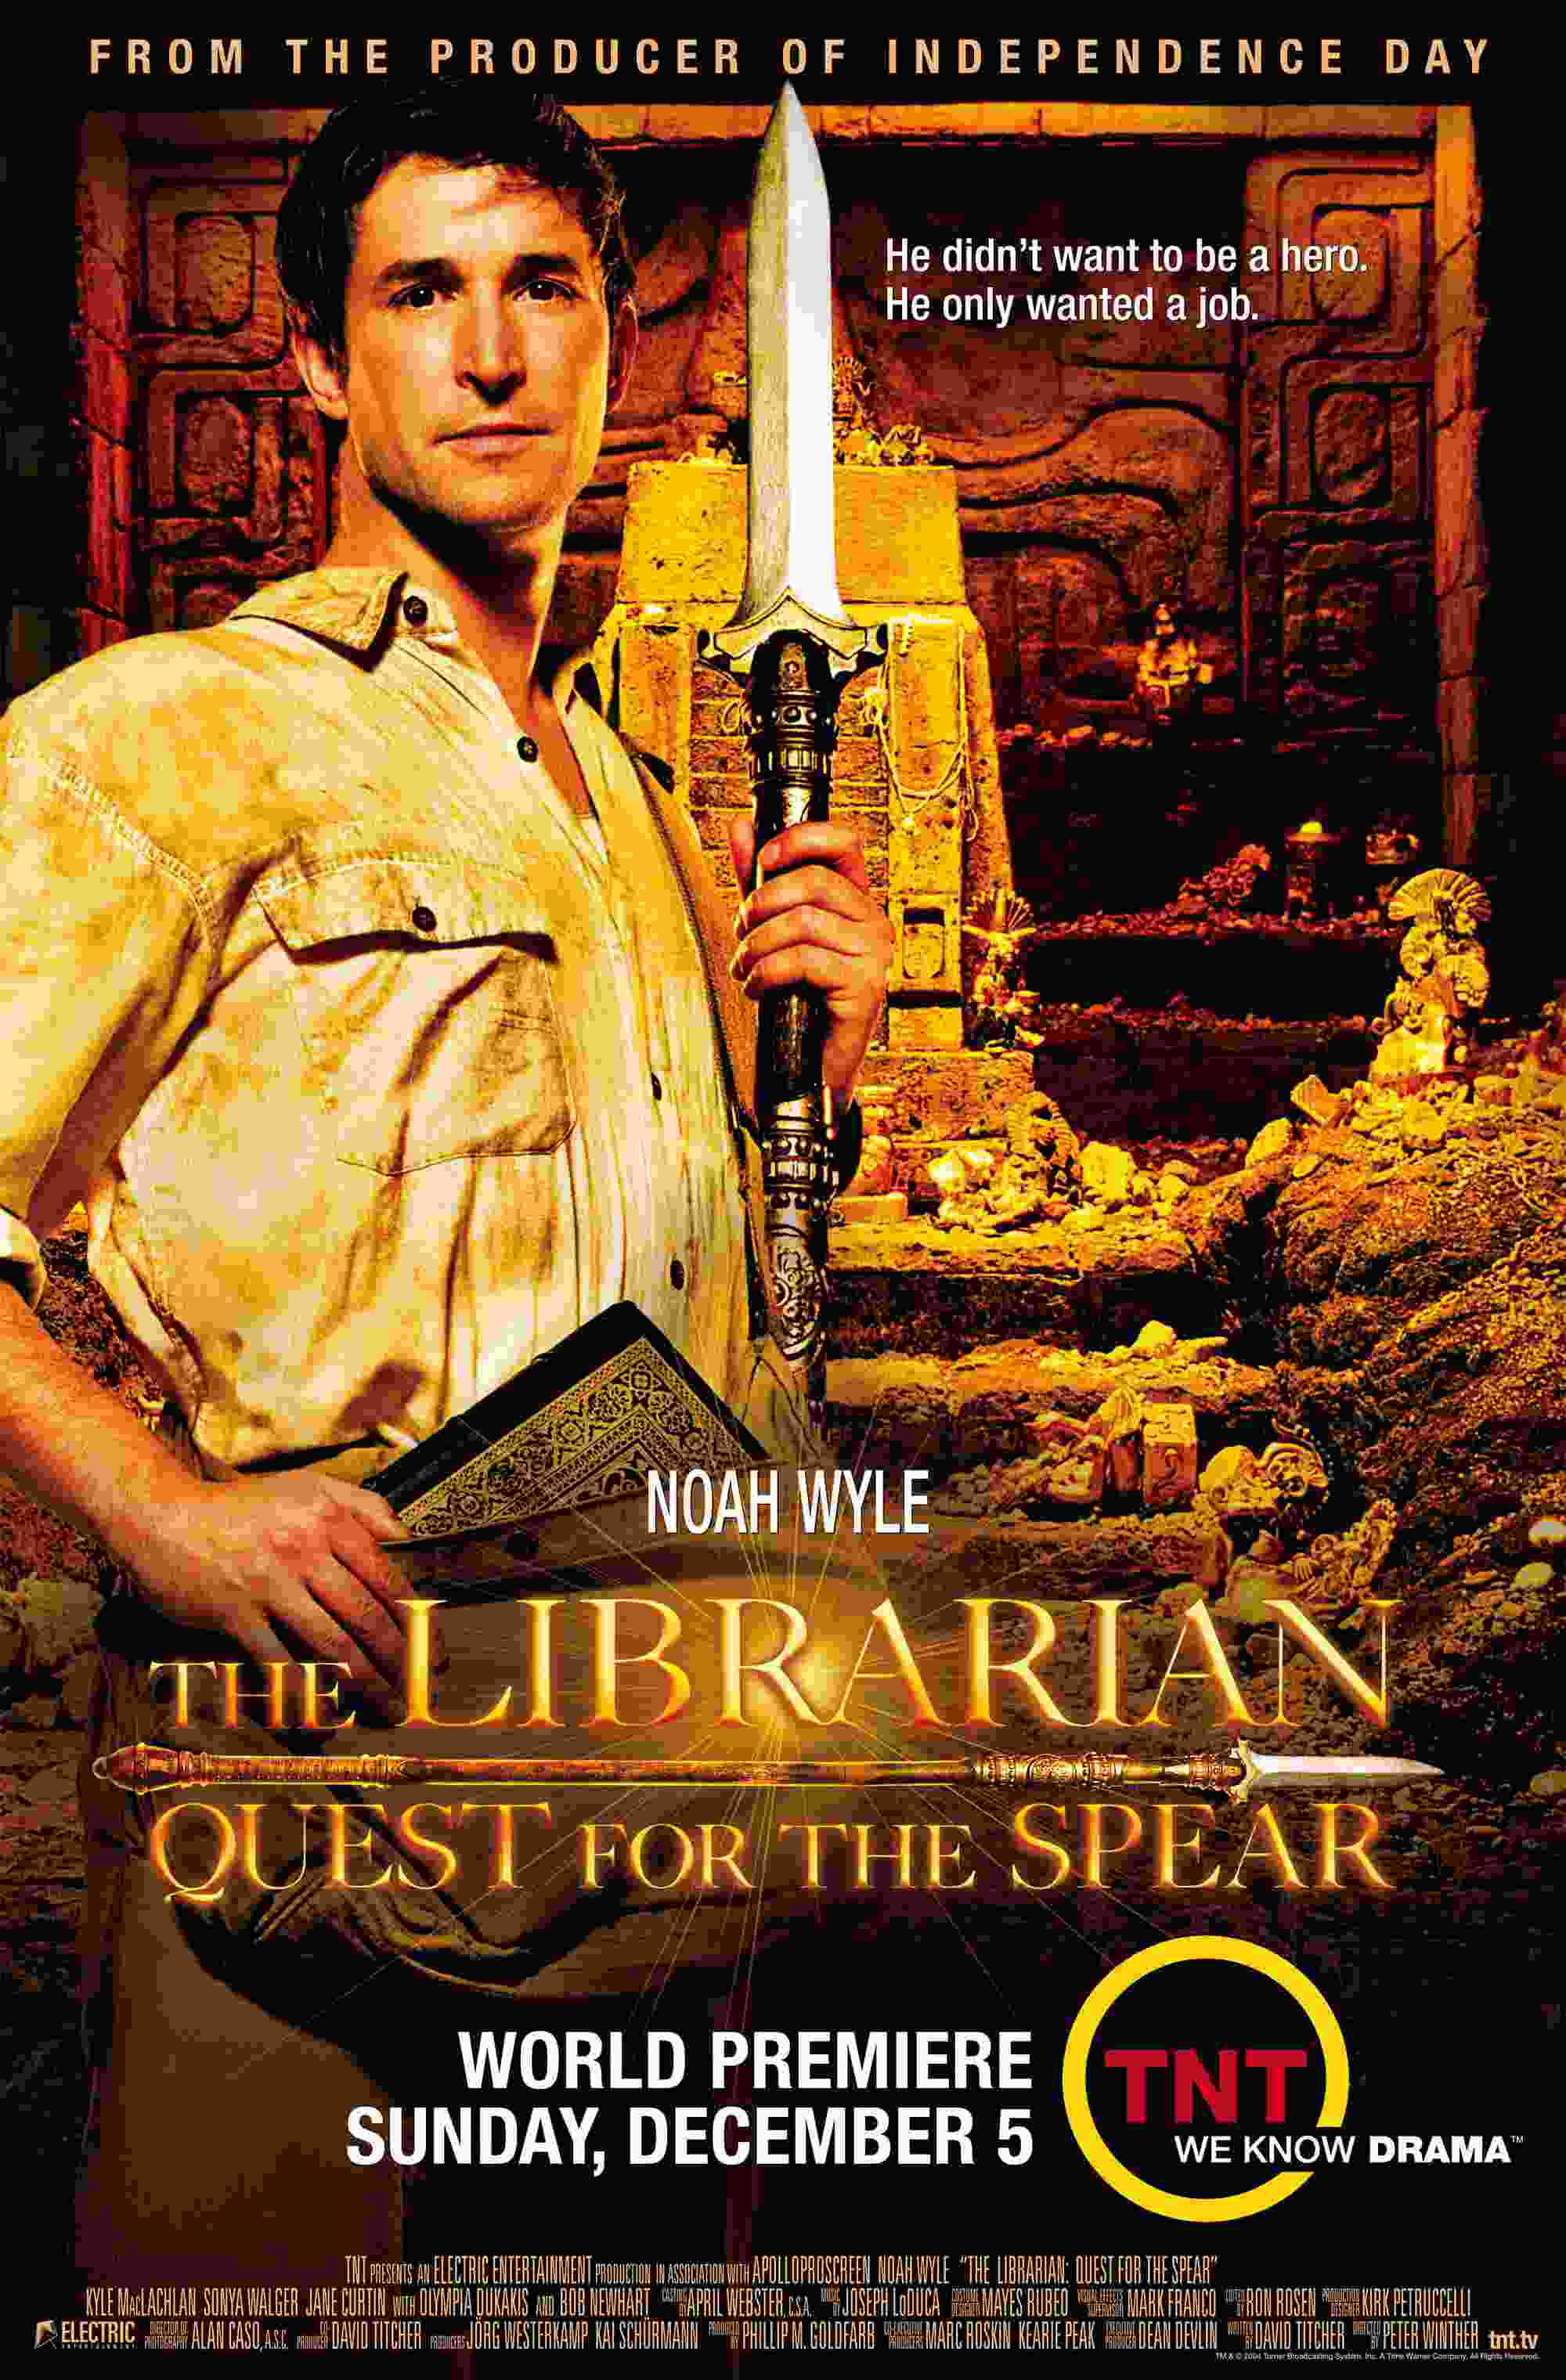 The Librarian: Quest for the Spear (2004) vj emmy Noah Wyle